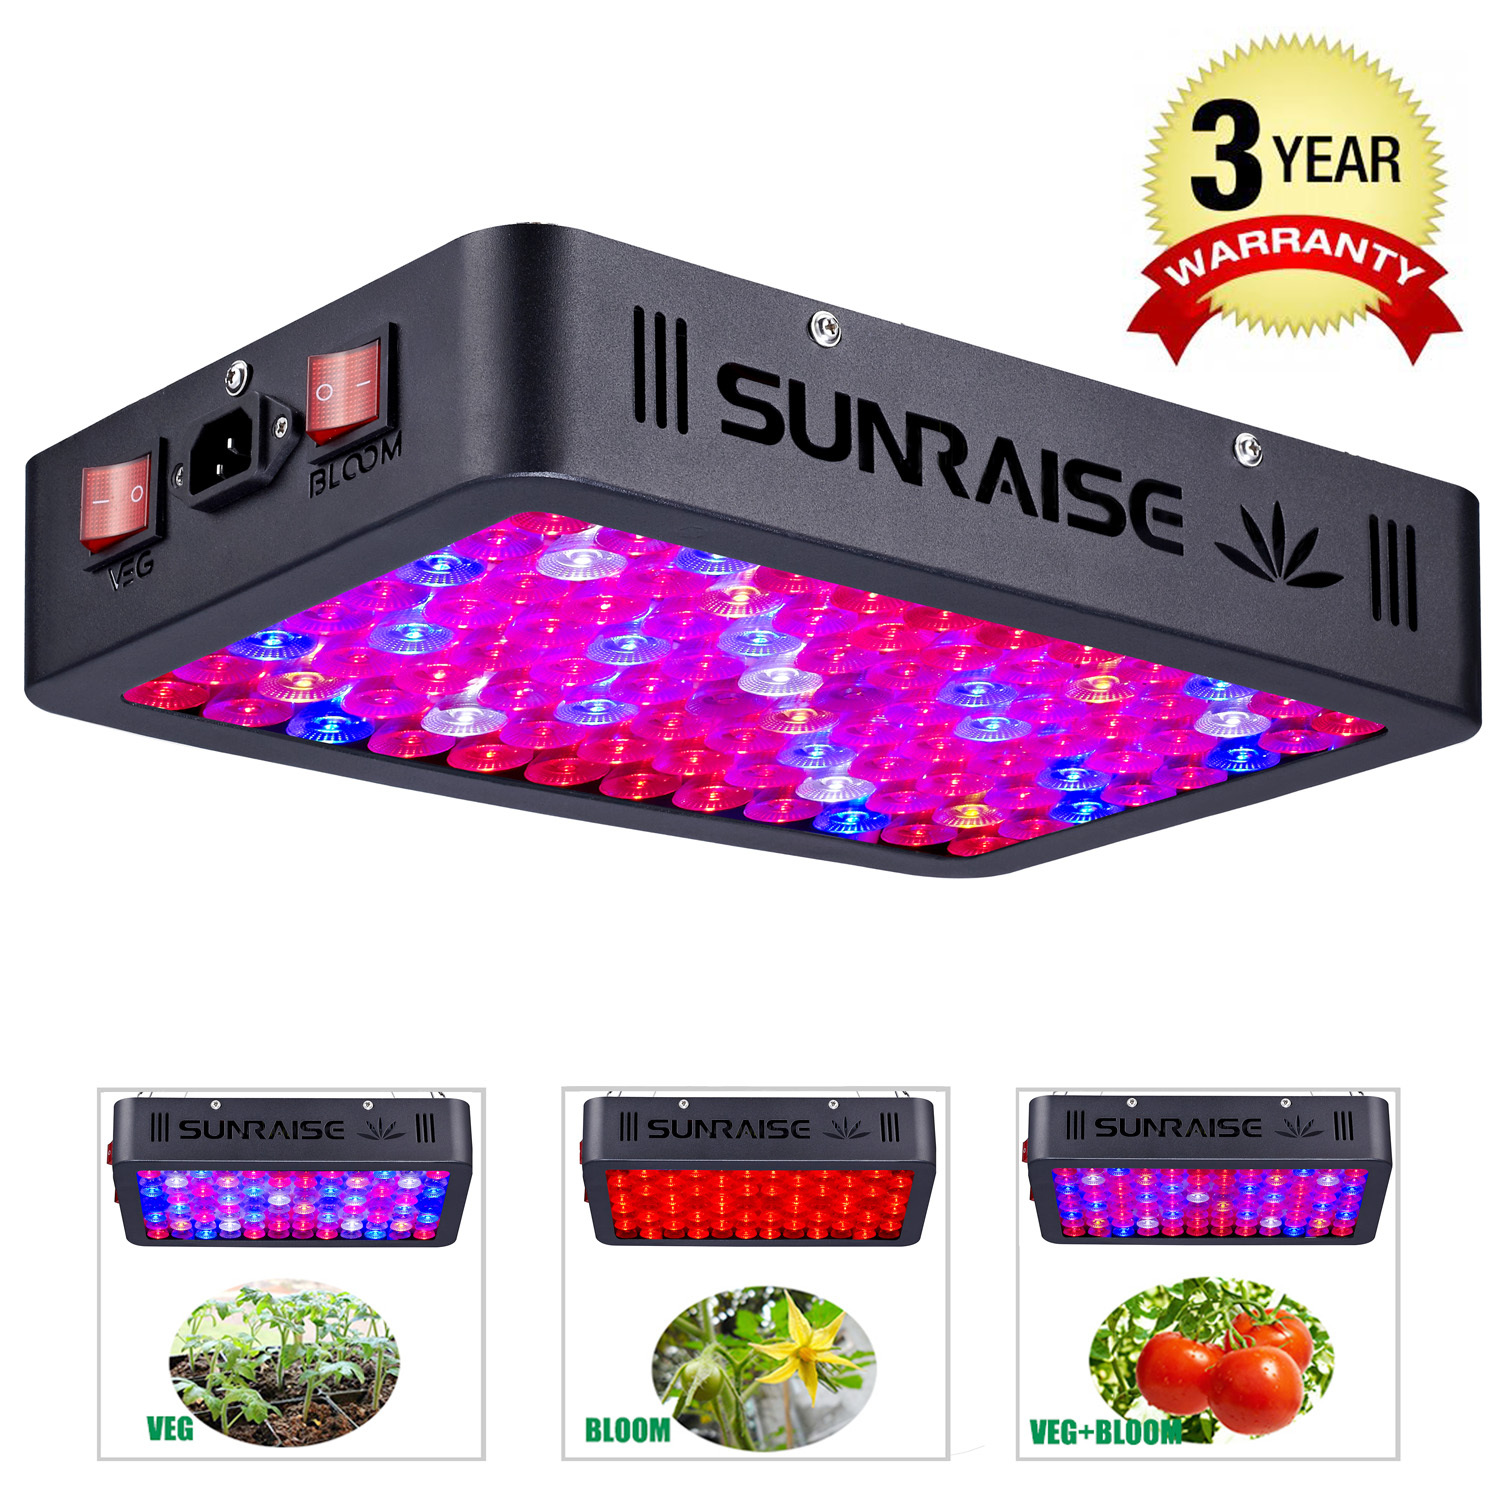  SUNRAISE 1000W LED Grow Light Full Spectrum for Indoor Plants  Veg and Flower LED Grow Lamp with Daisy Chain Triple-Chips LED (15W LED  96pcs) : Patio, Lawn & Garden